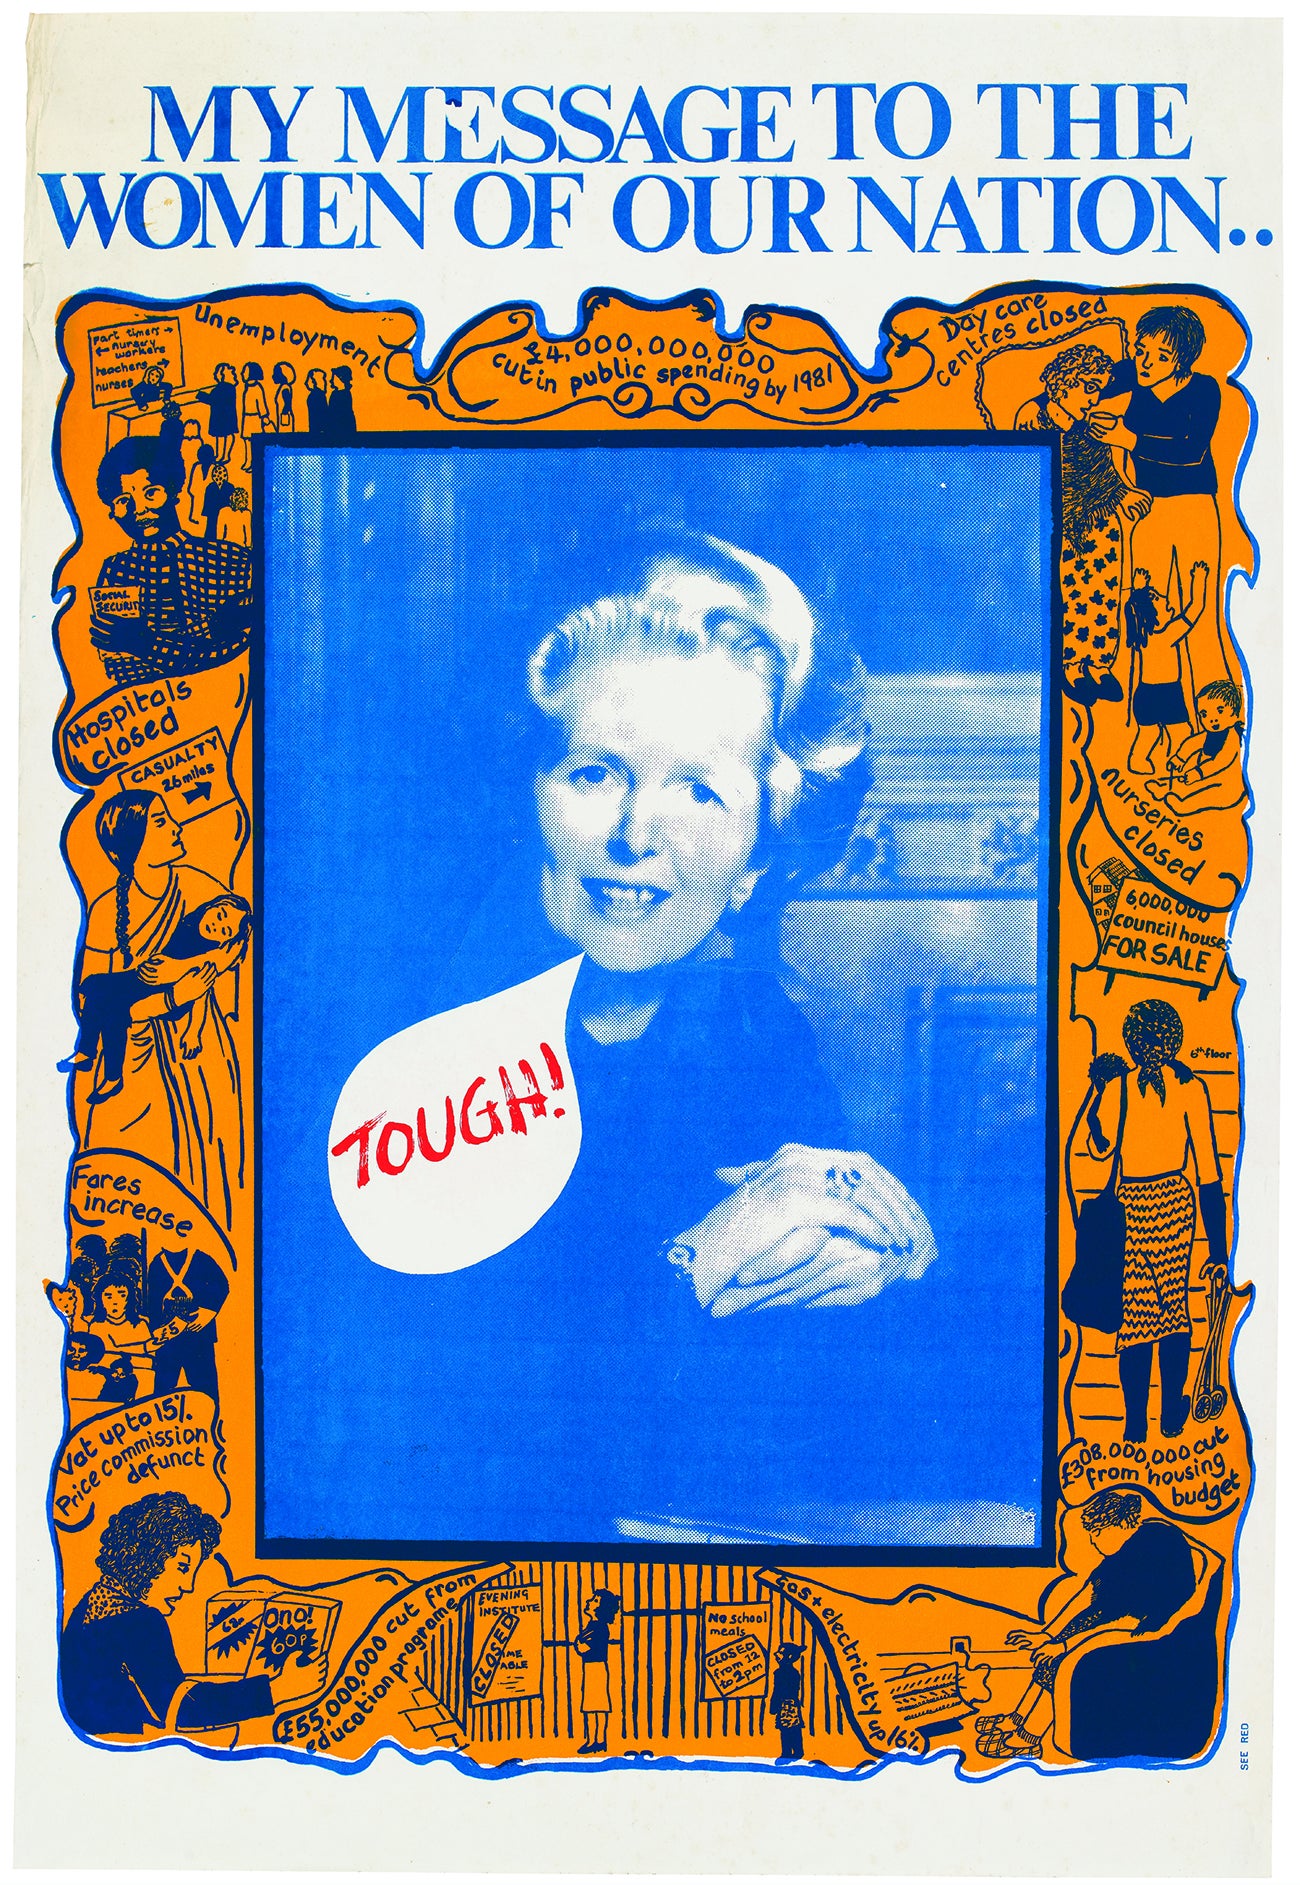 Red Women’s Workshop, ‘ Tough! My Message to the Women of Our Nation…’ (1979)